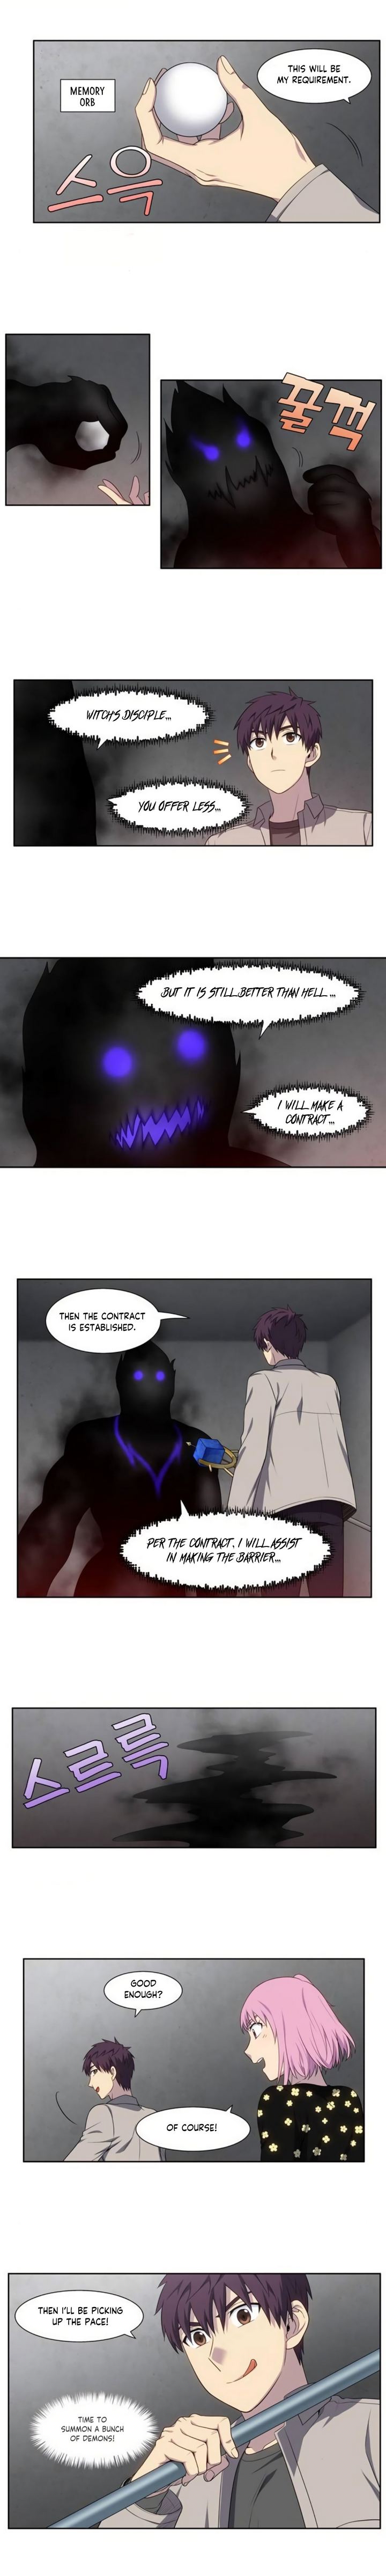 The Gamer - Chapter 358 Page 5